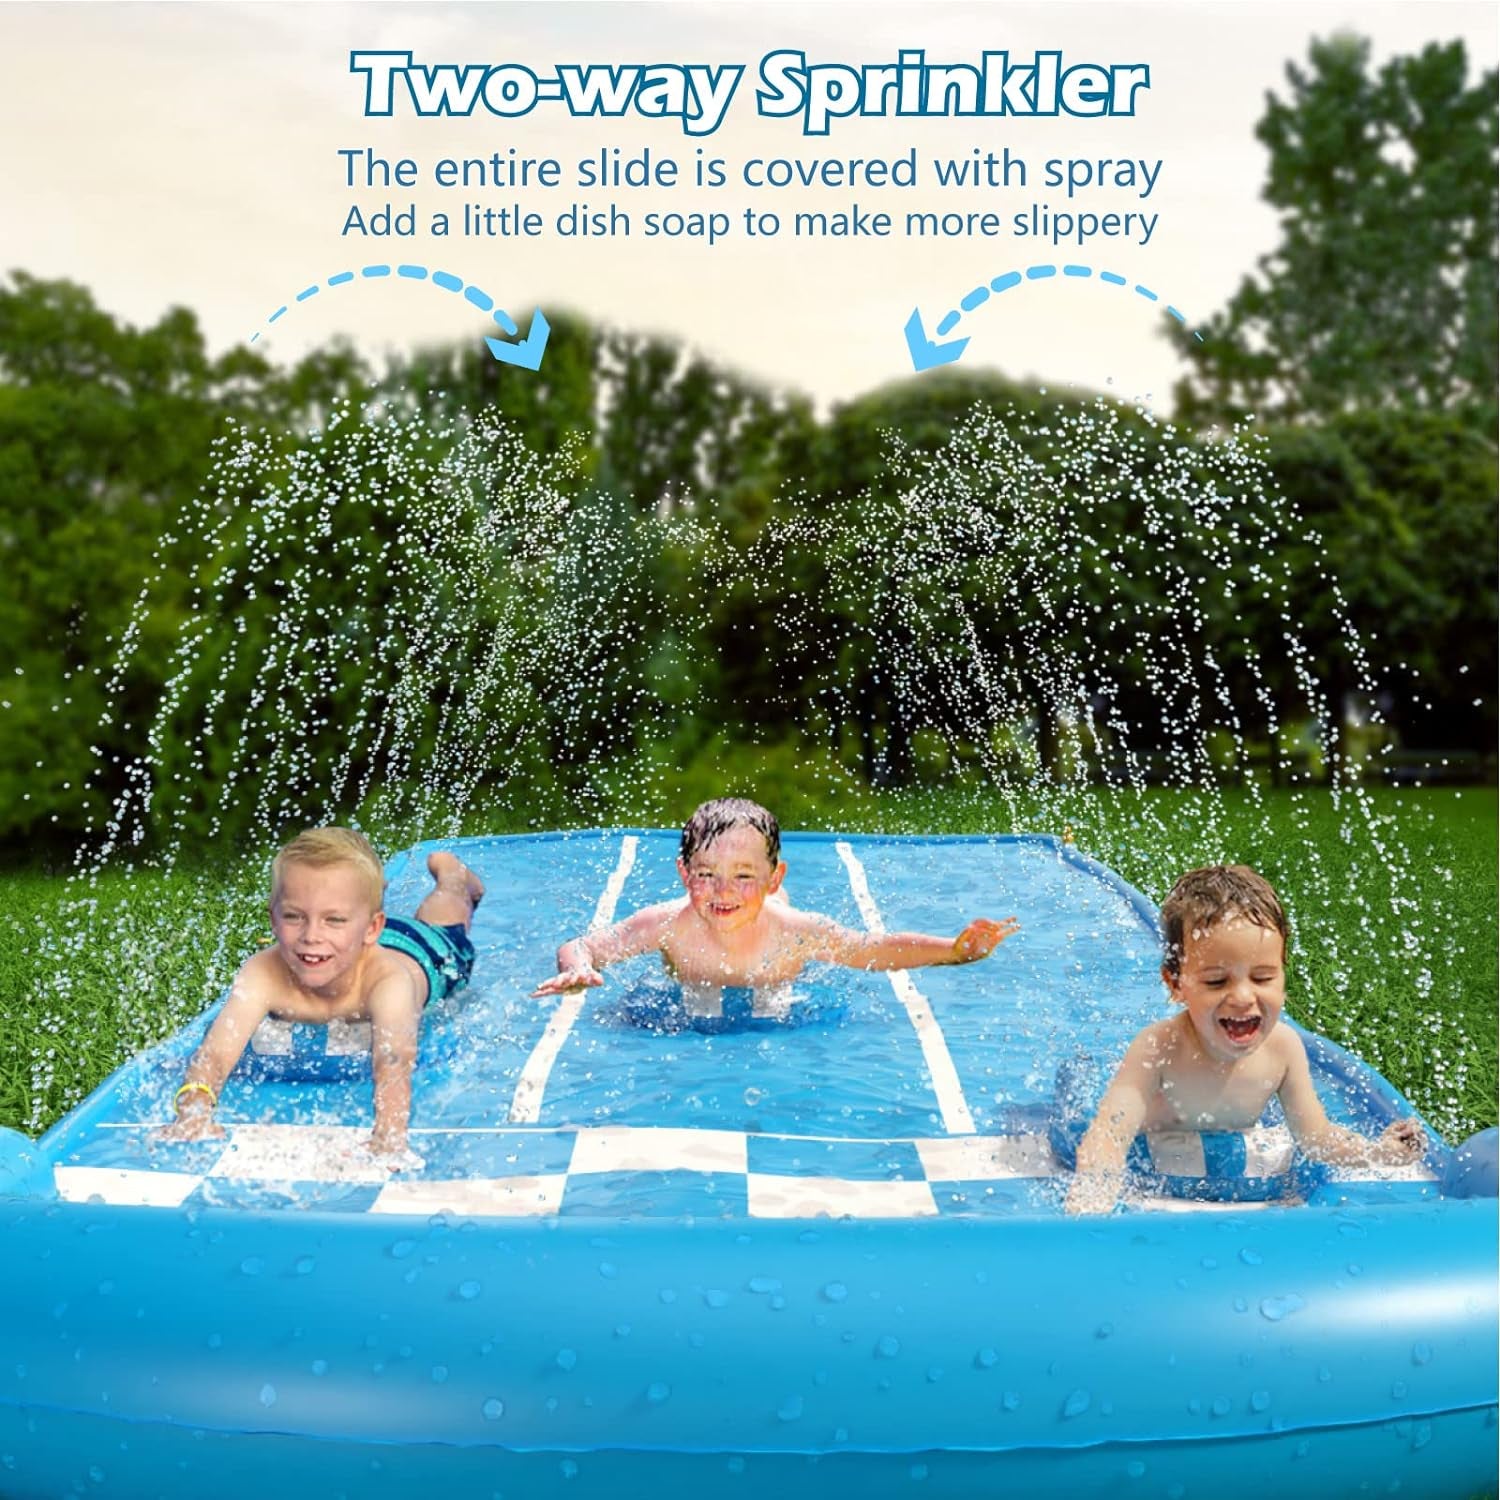 Slip and Slide Lawn Toy - Lawn Water Slides Summer Slip Waterslide for Kids Adults 20Ft Extra Long with Sprinkler N 3 Bodyboards Backyard Games Outdoor Splash Water Toys outside Play Park